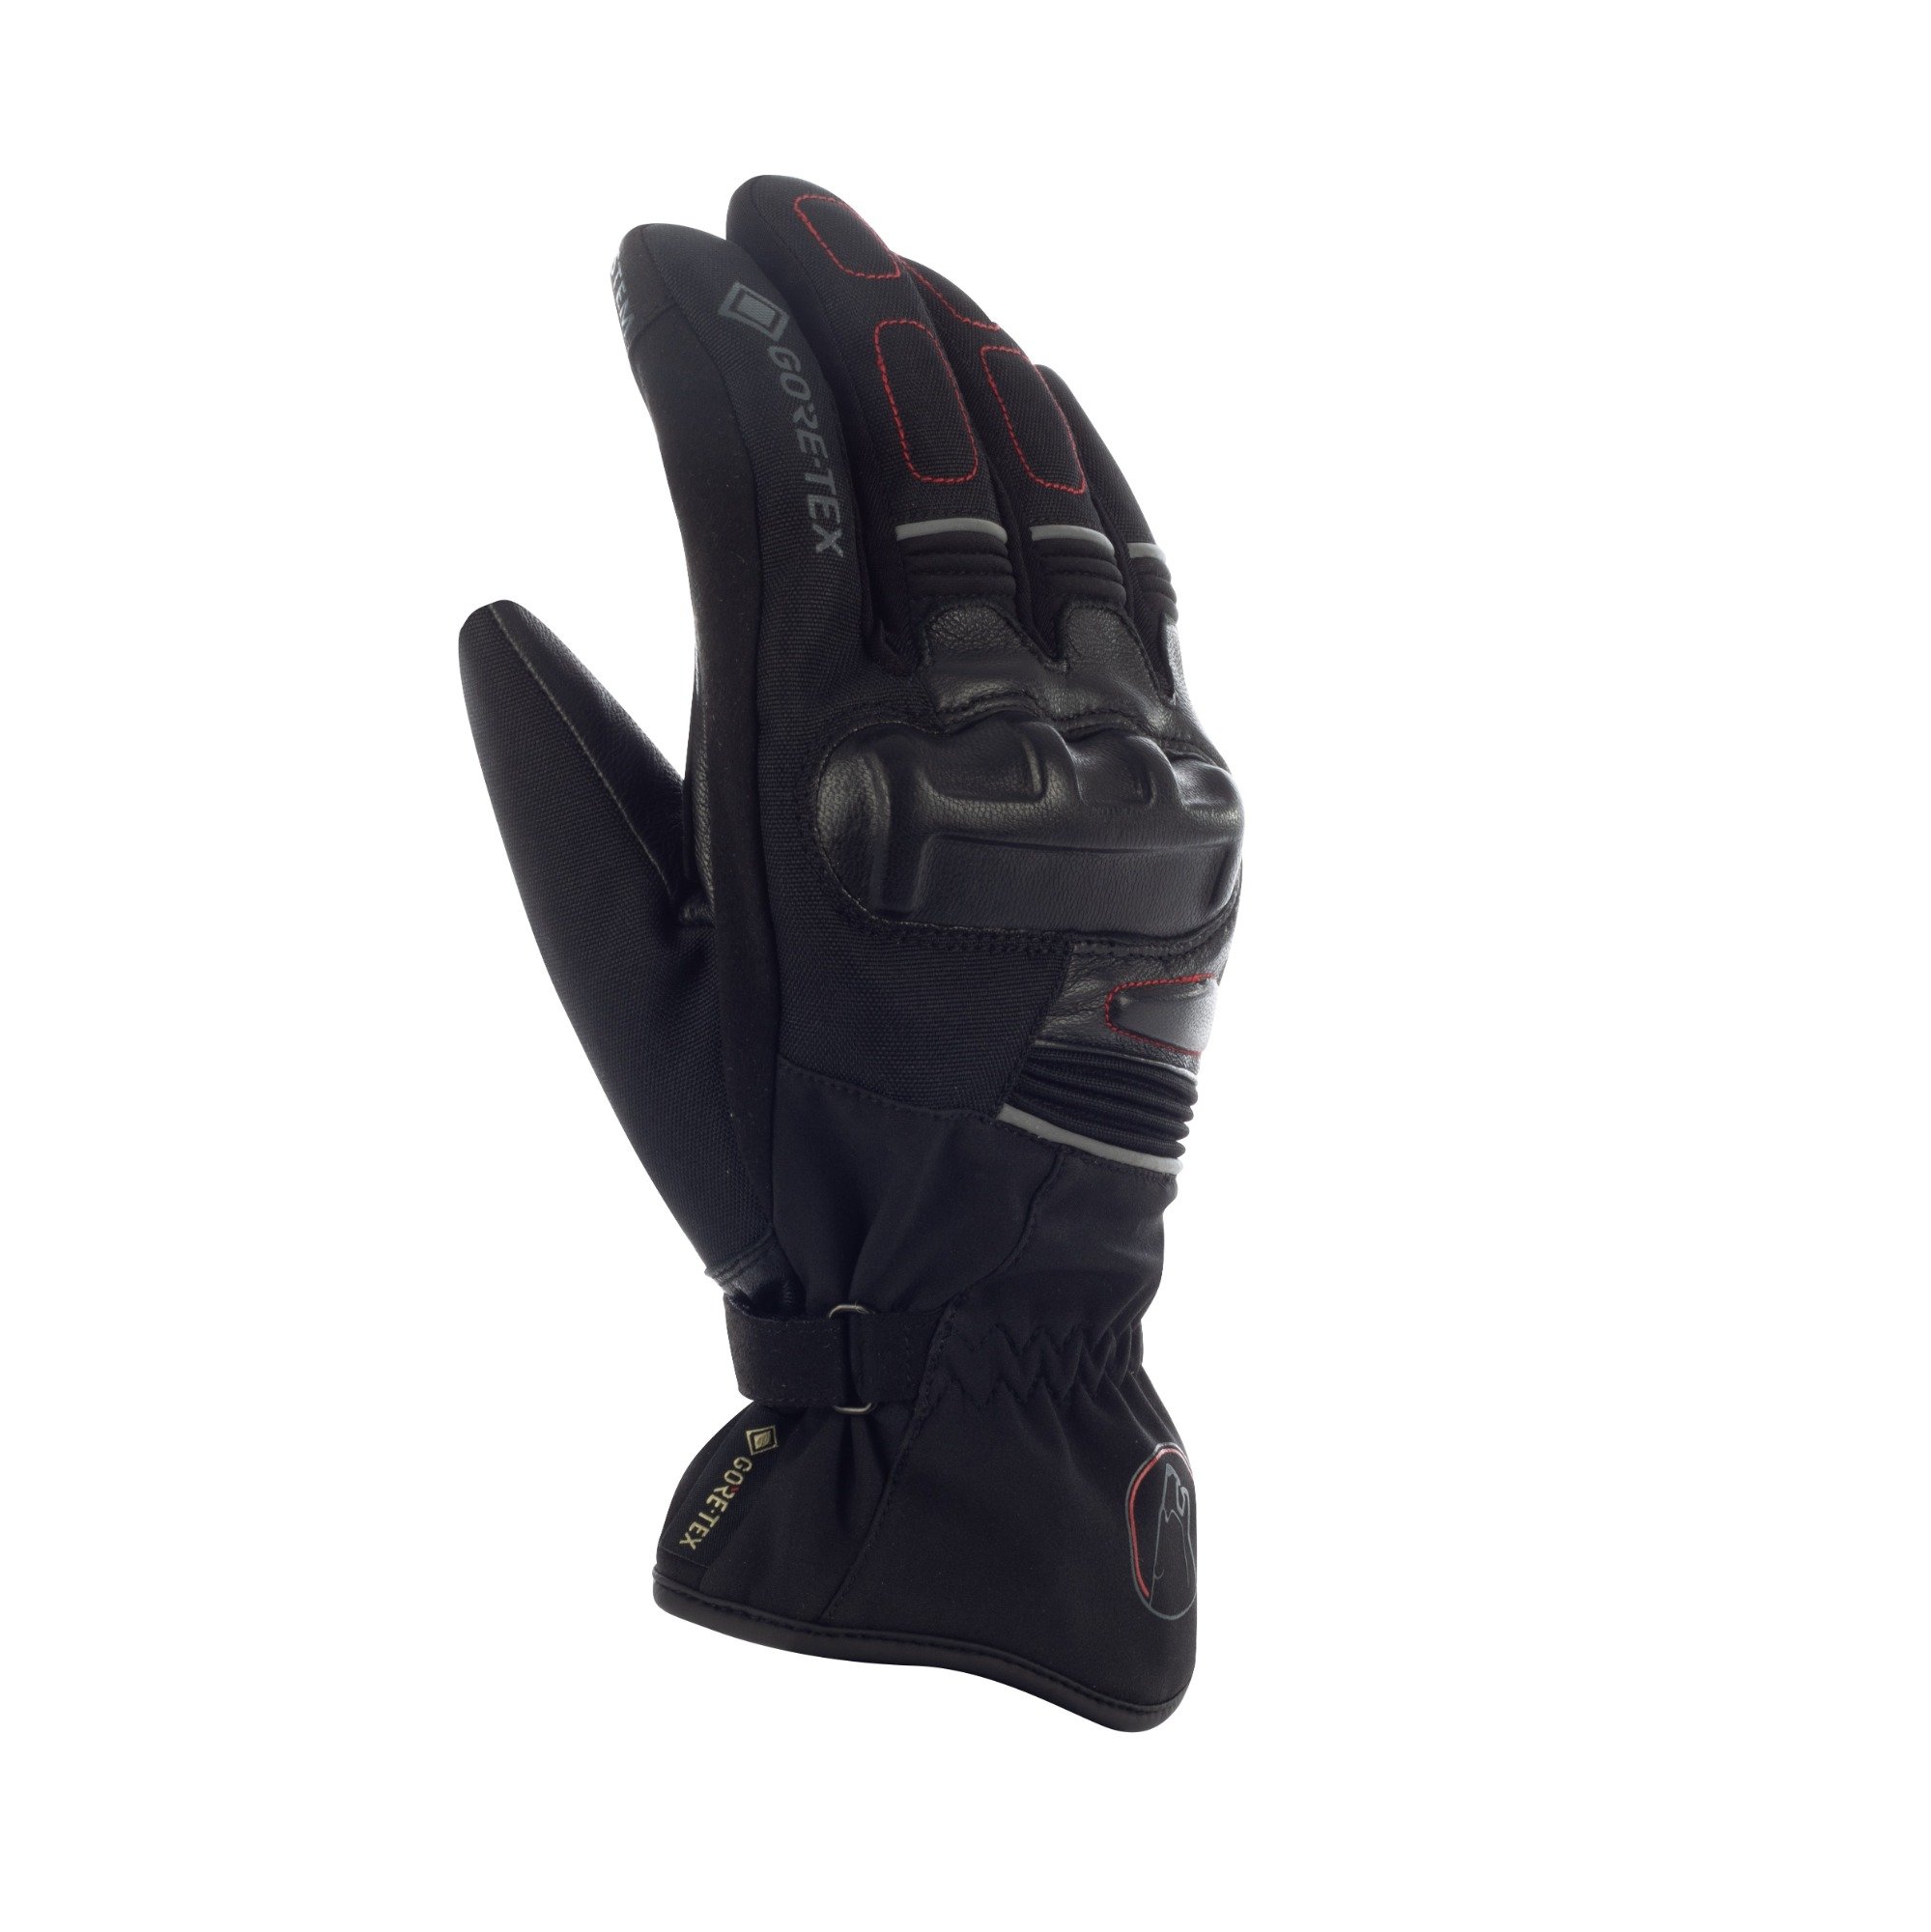 Image of Bering Punch GTX Gloves Black Size T10 ID 3660815172063